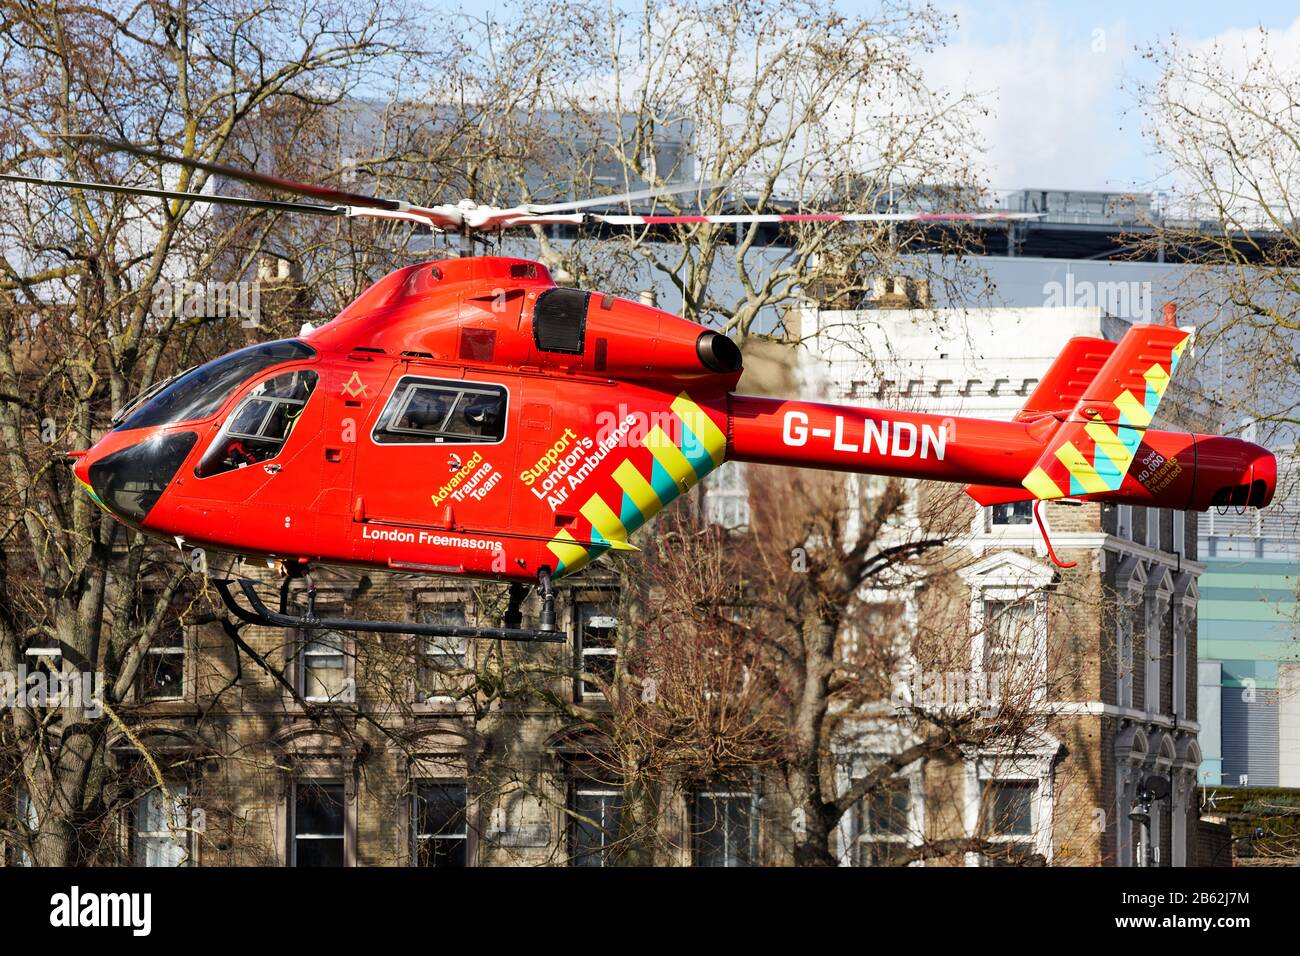 London, U.K. - 2 Mar 2020: A helicopter (MD902 Explorer Registration G-LNDN) from the London Air Ambulance service itaking off. Stock Photo